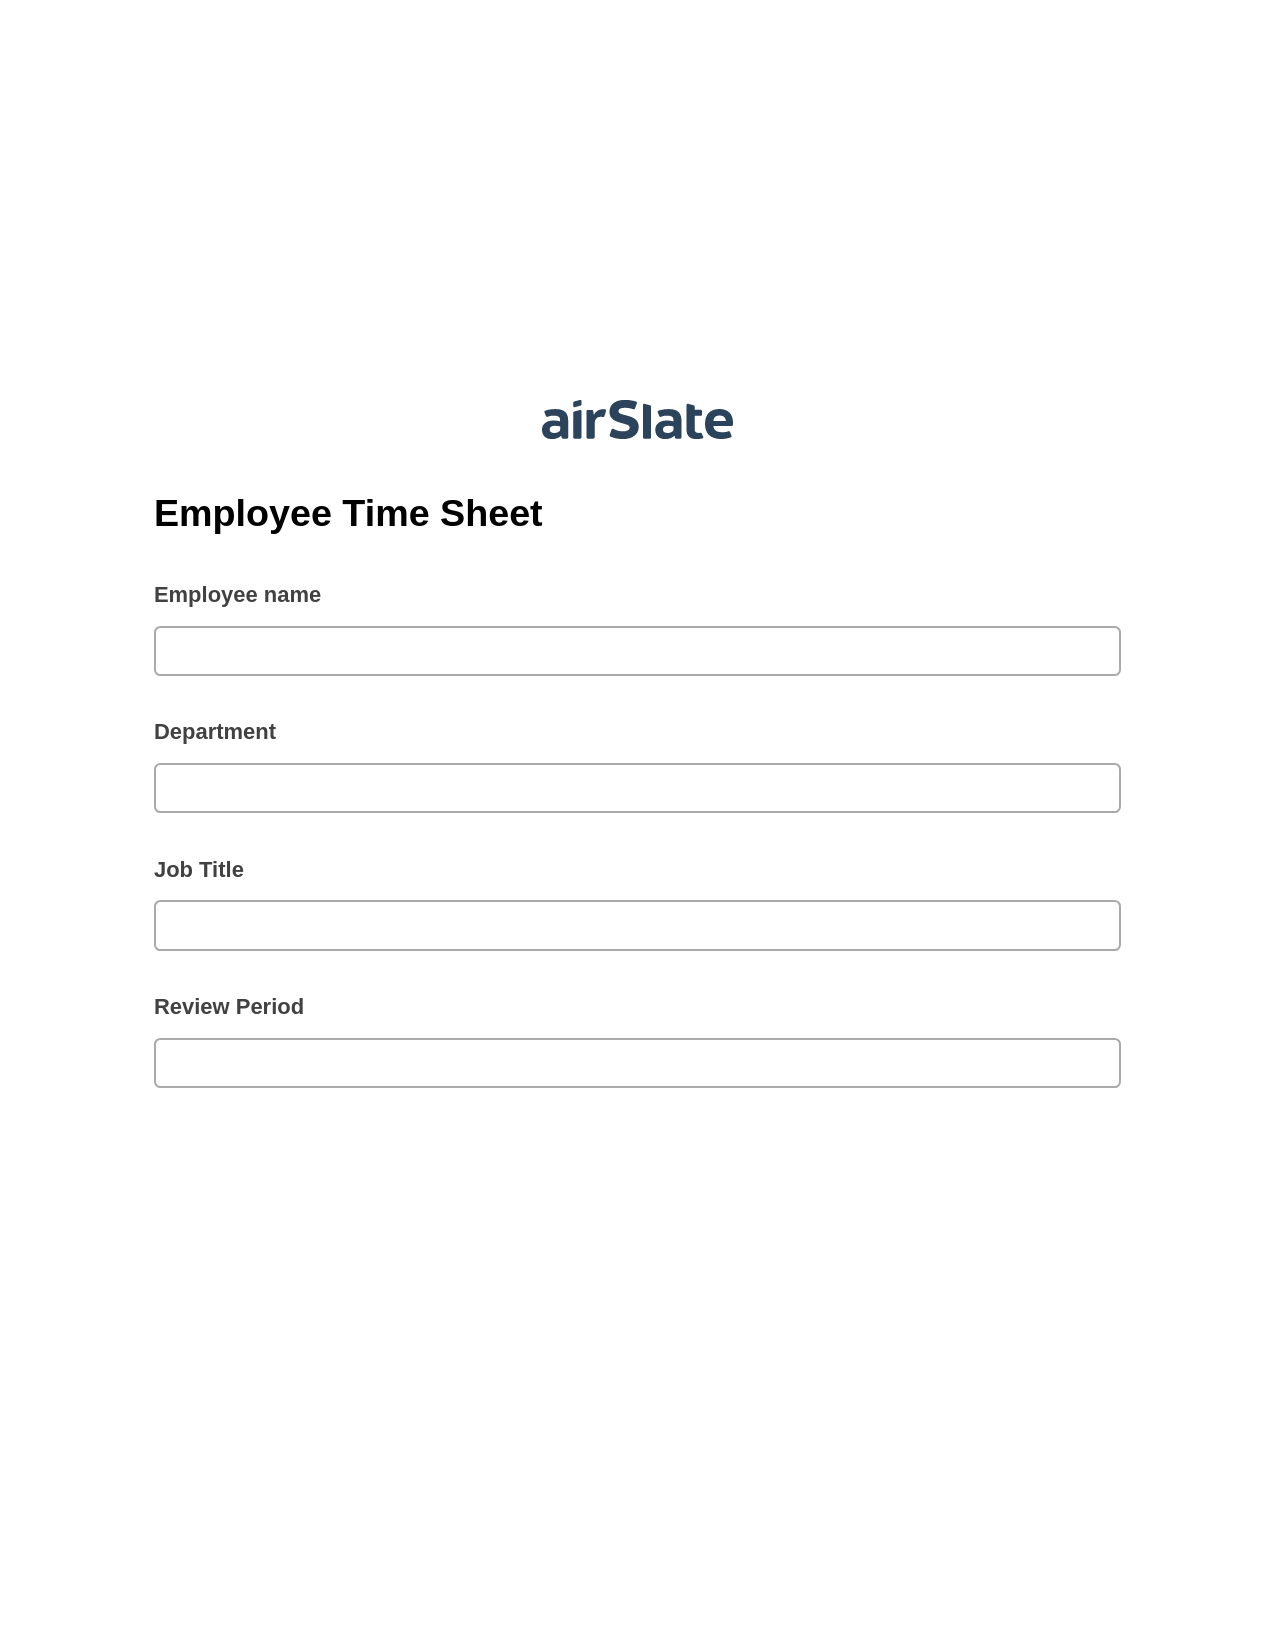 Employee Time Sheet Pre-fill from MySQL Bot, Create Salesforce Records Bot, Export to Excel 365 Bot